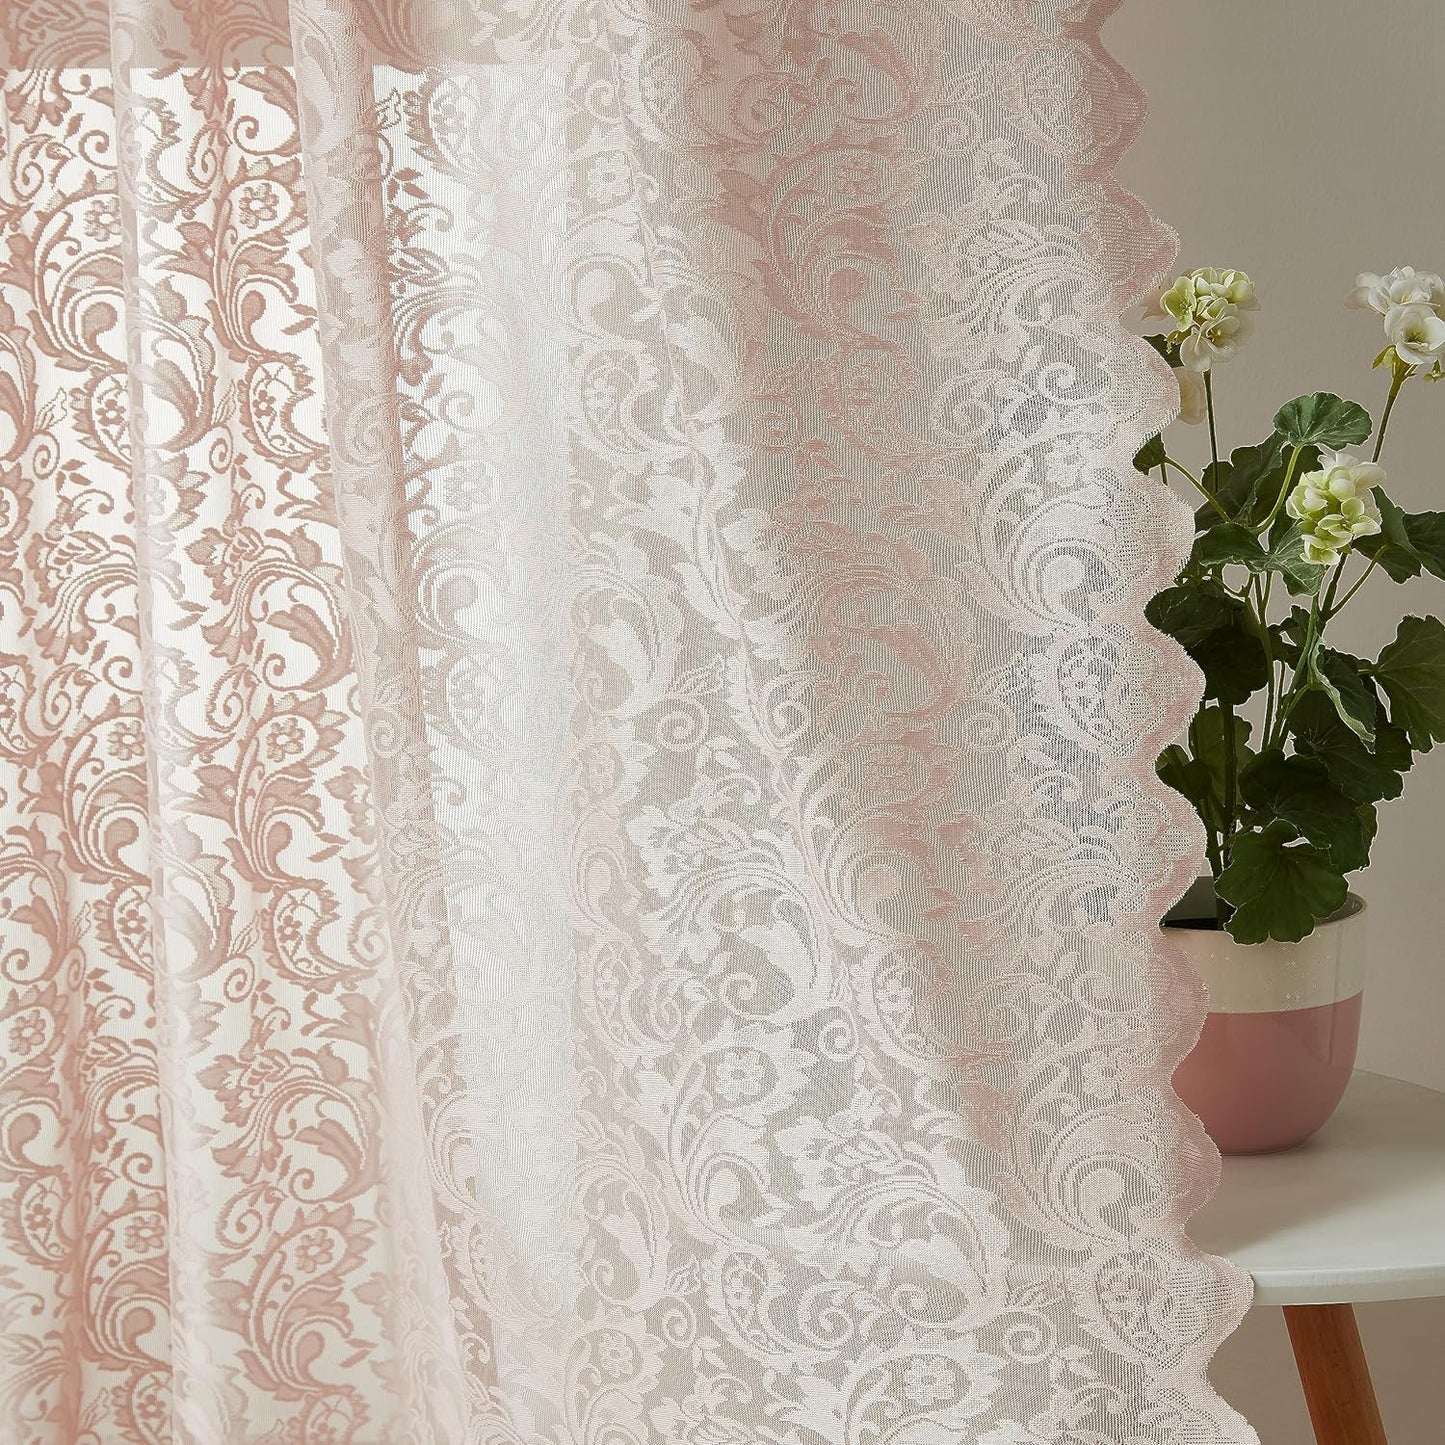 Black Sheer Lace Curtains 84 Inch Vintage Floral Sheer Gothic Curtain Panels for Living Room Bedroom Luxury Light Filtering Drapes Black Window Treatment Sets Rod Pocket 2 Panels 54" Wx84 L  Bujasso Rod Pocket Pink 54"X54"X2 